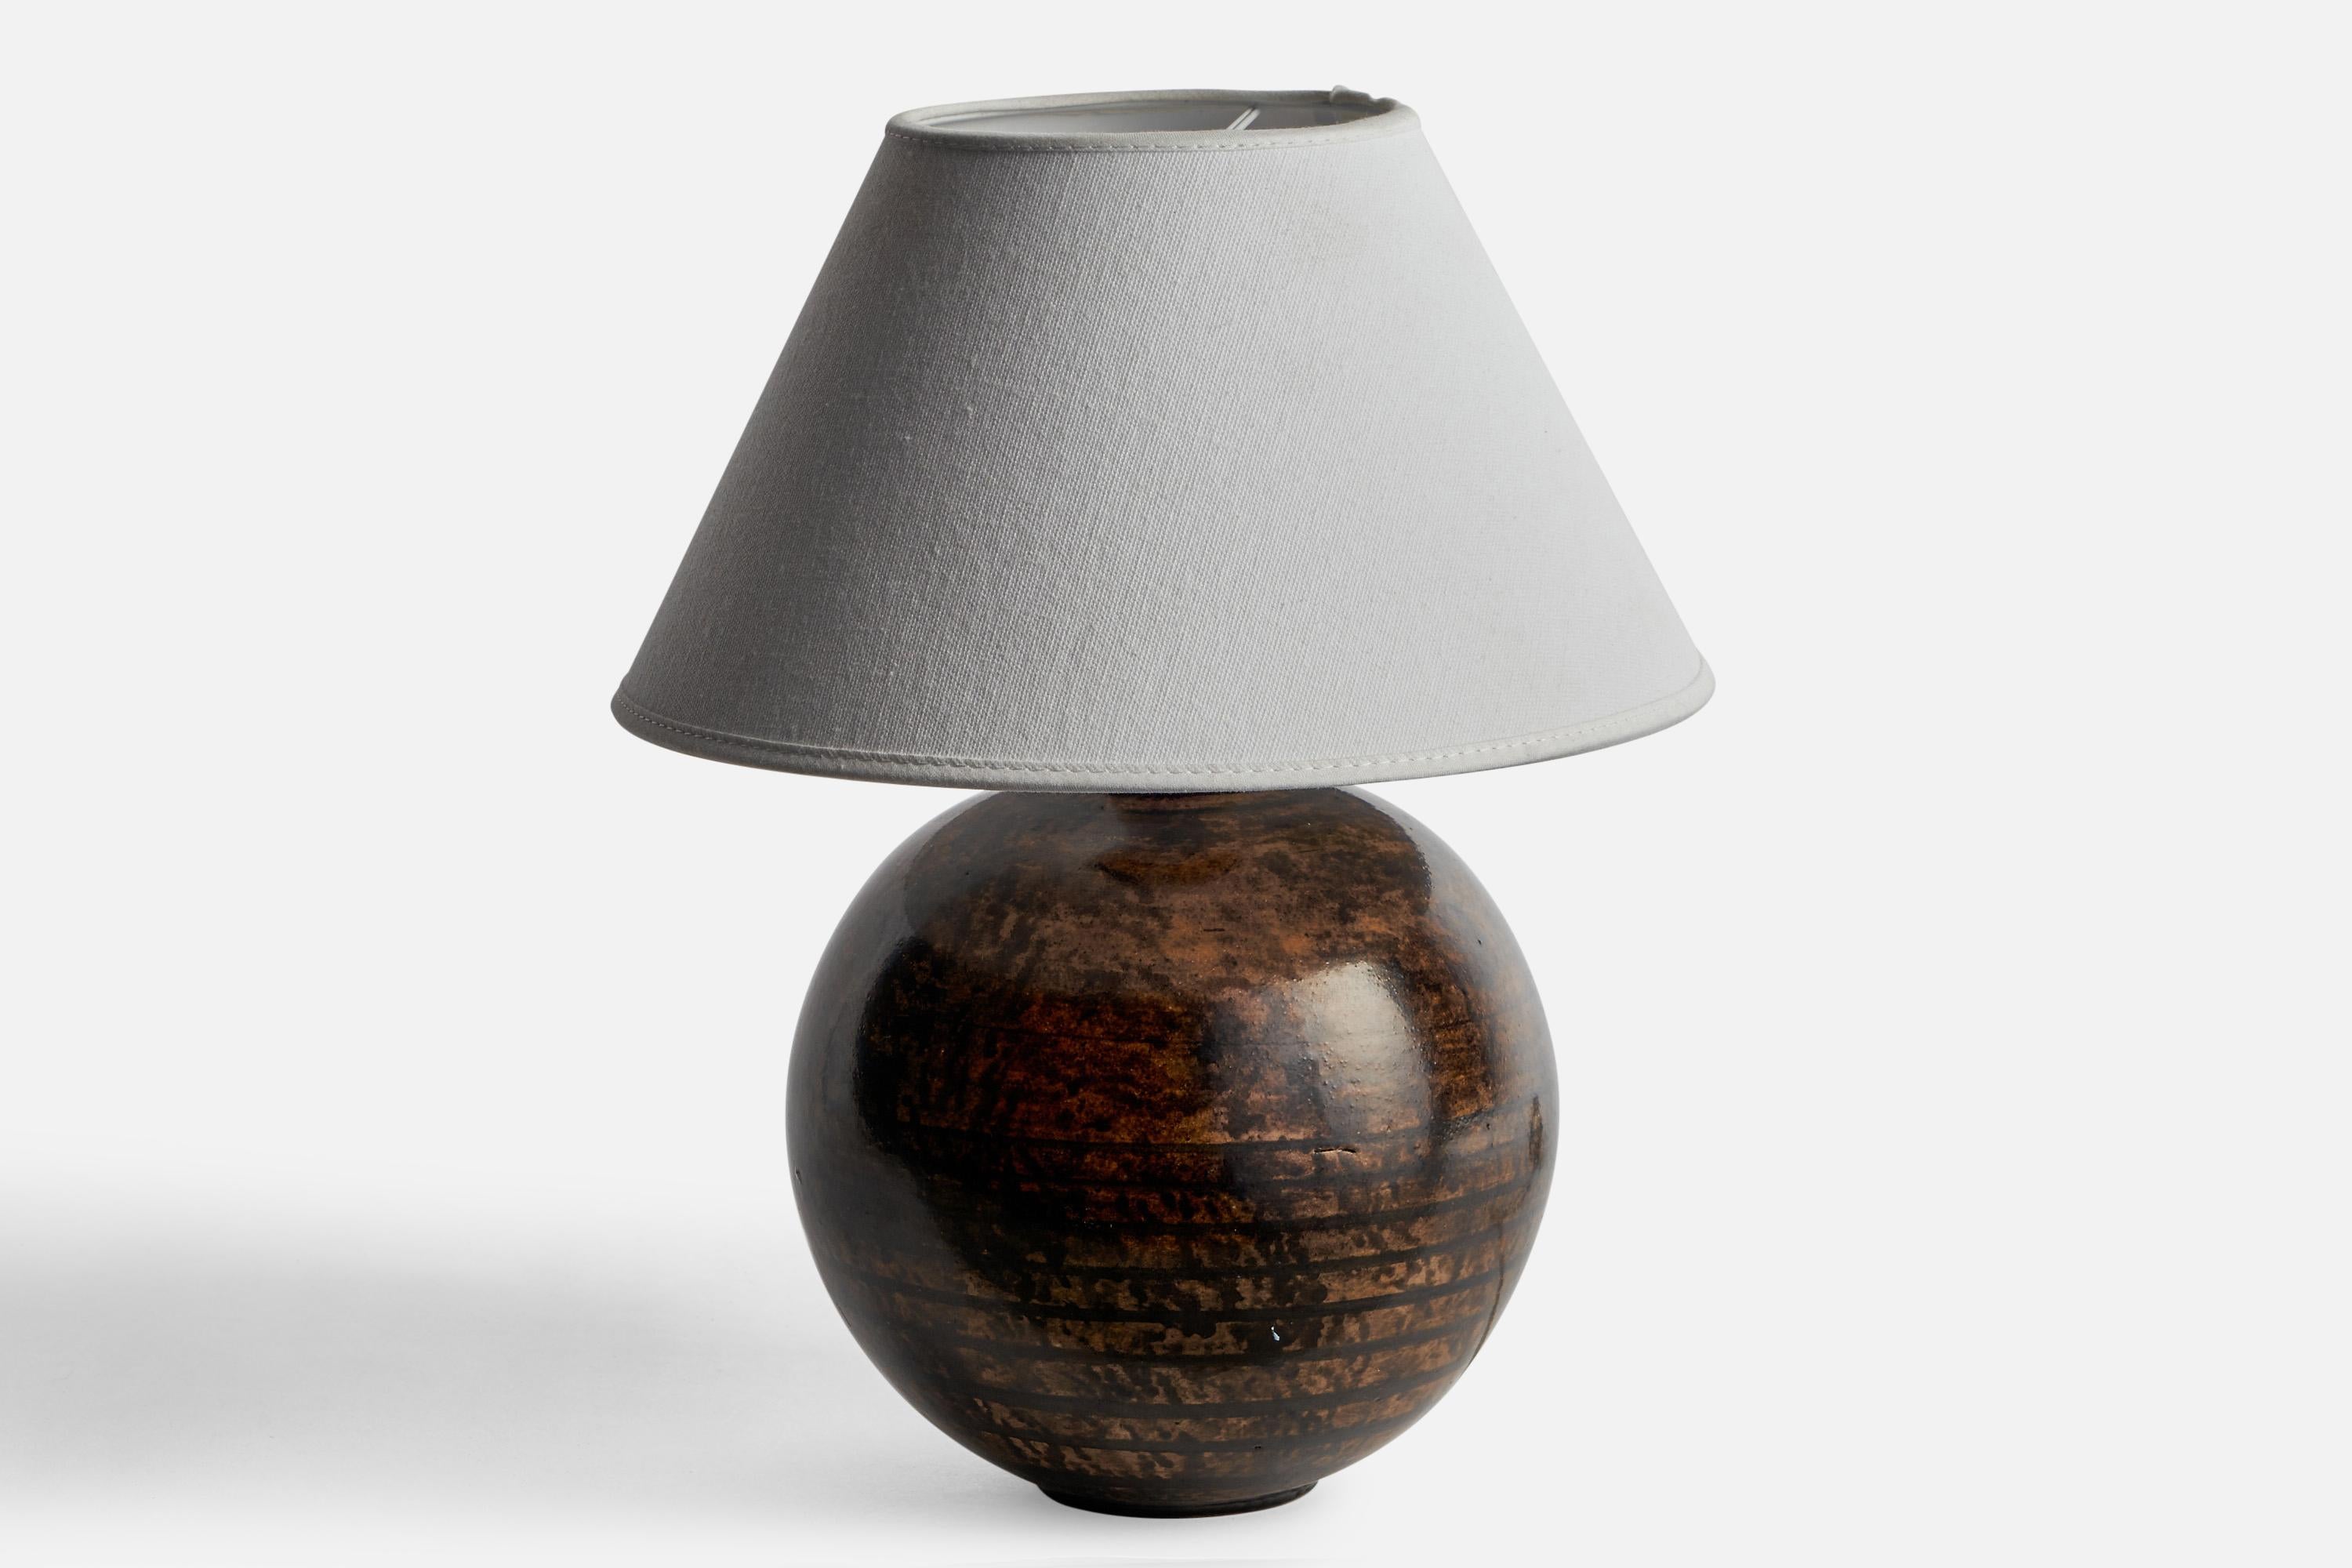 A brown and black-glazed ceramic table lamp designed and produced in Sweden, 1930s.

Dimensions of Lamp (inches): 8.95” H x 6.85” Diameter
Dimensions of Shade (inches): 4.5” Top Diameter x 10” Bottom Diameter x 5.25” H
Dimensions of Lamp with Shade